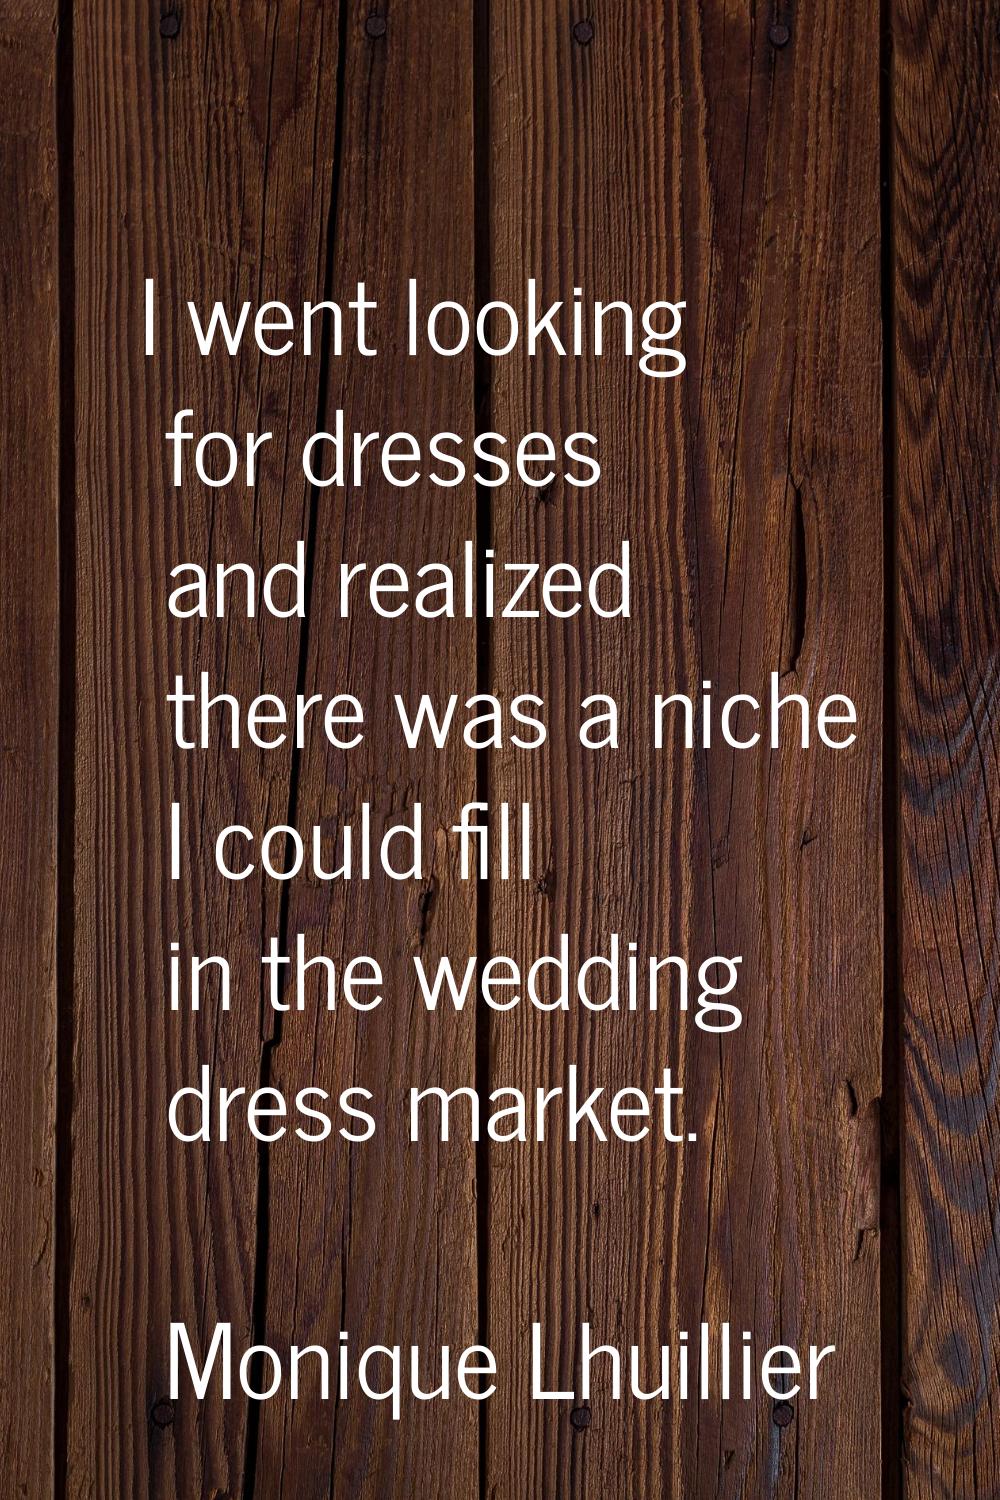 I went looking for dresses and realized there was a niche I could fill in the wedding dress market.